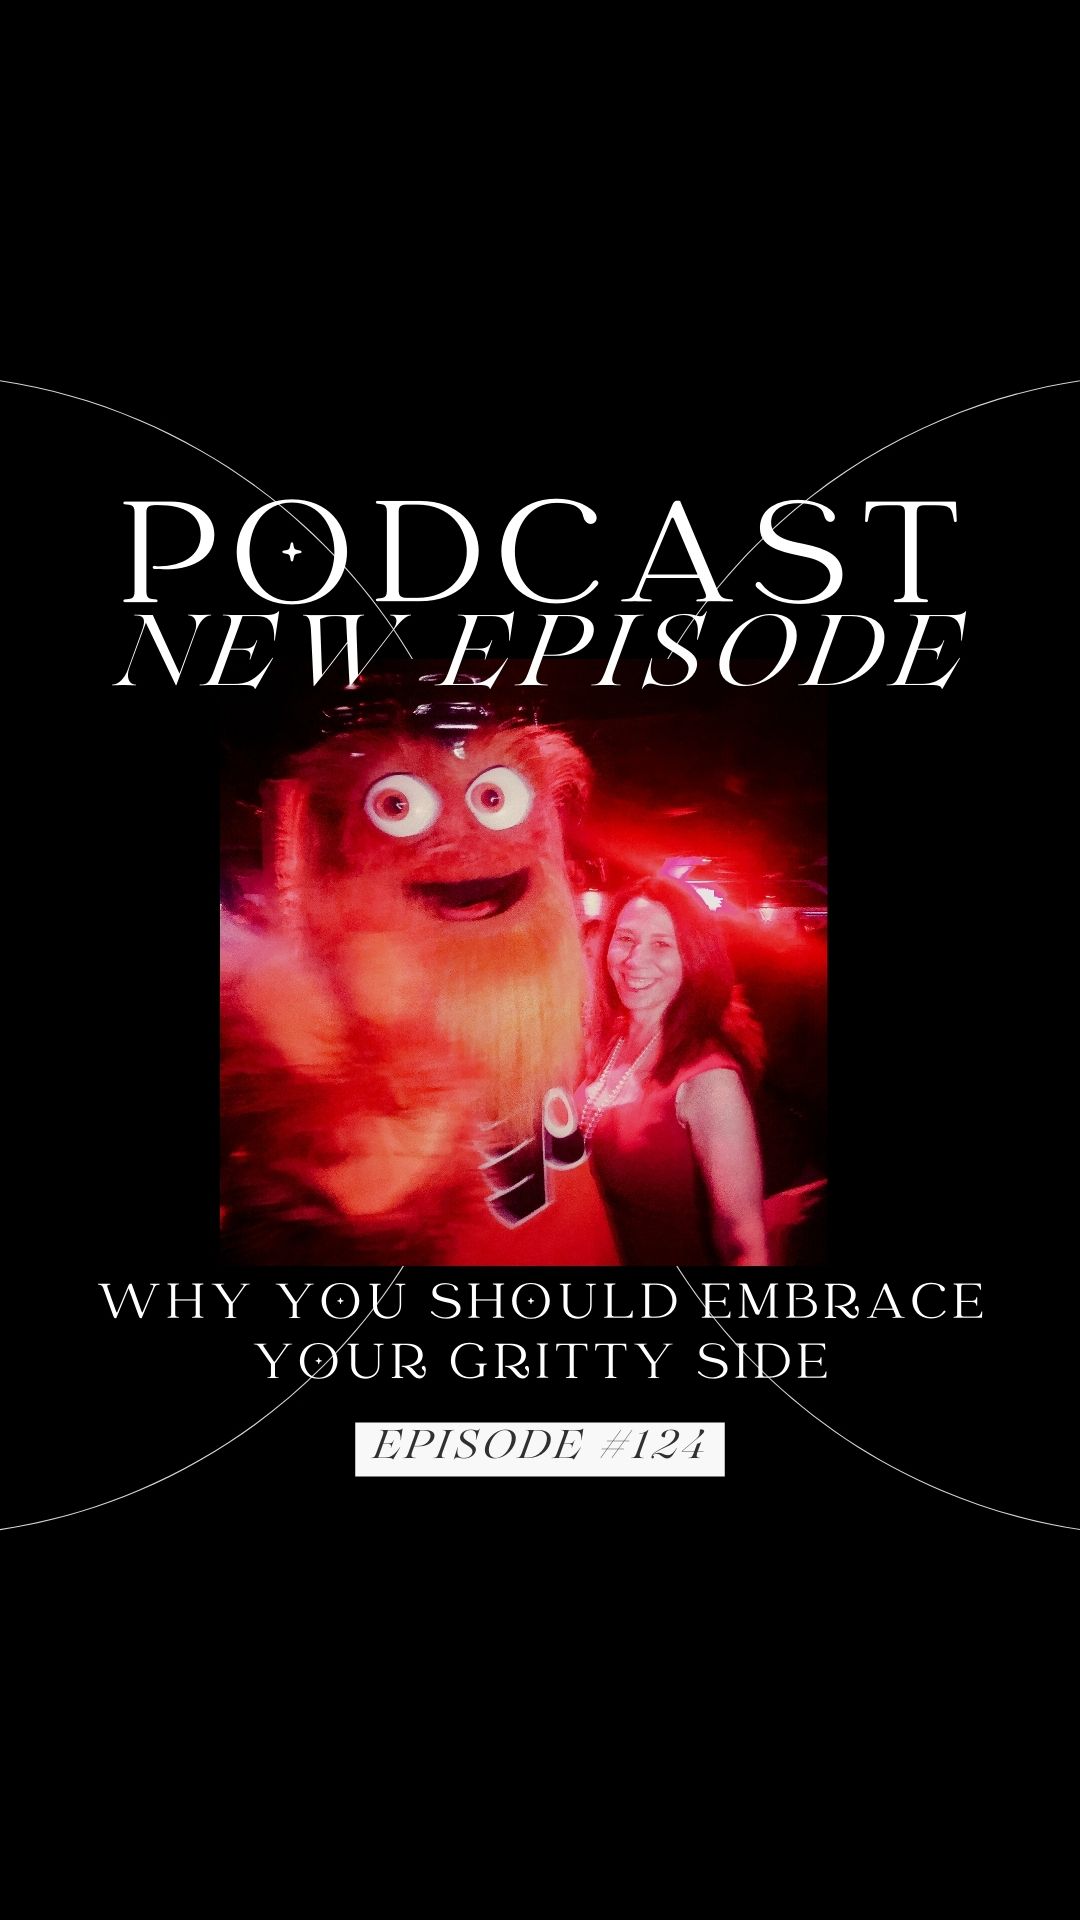 Episode #124: Why You Should Embrace Your Gritty Side